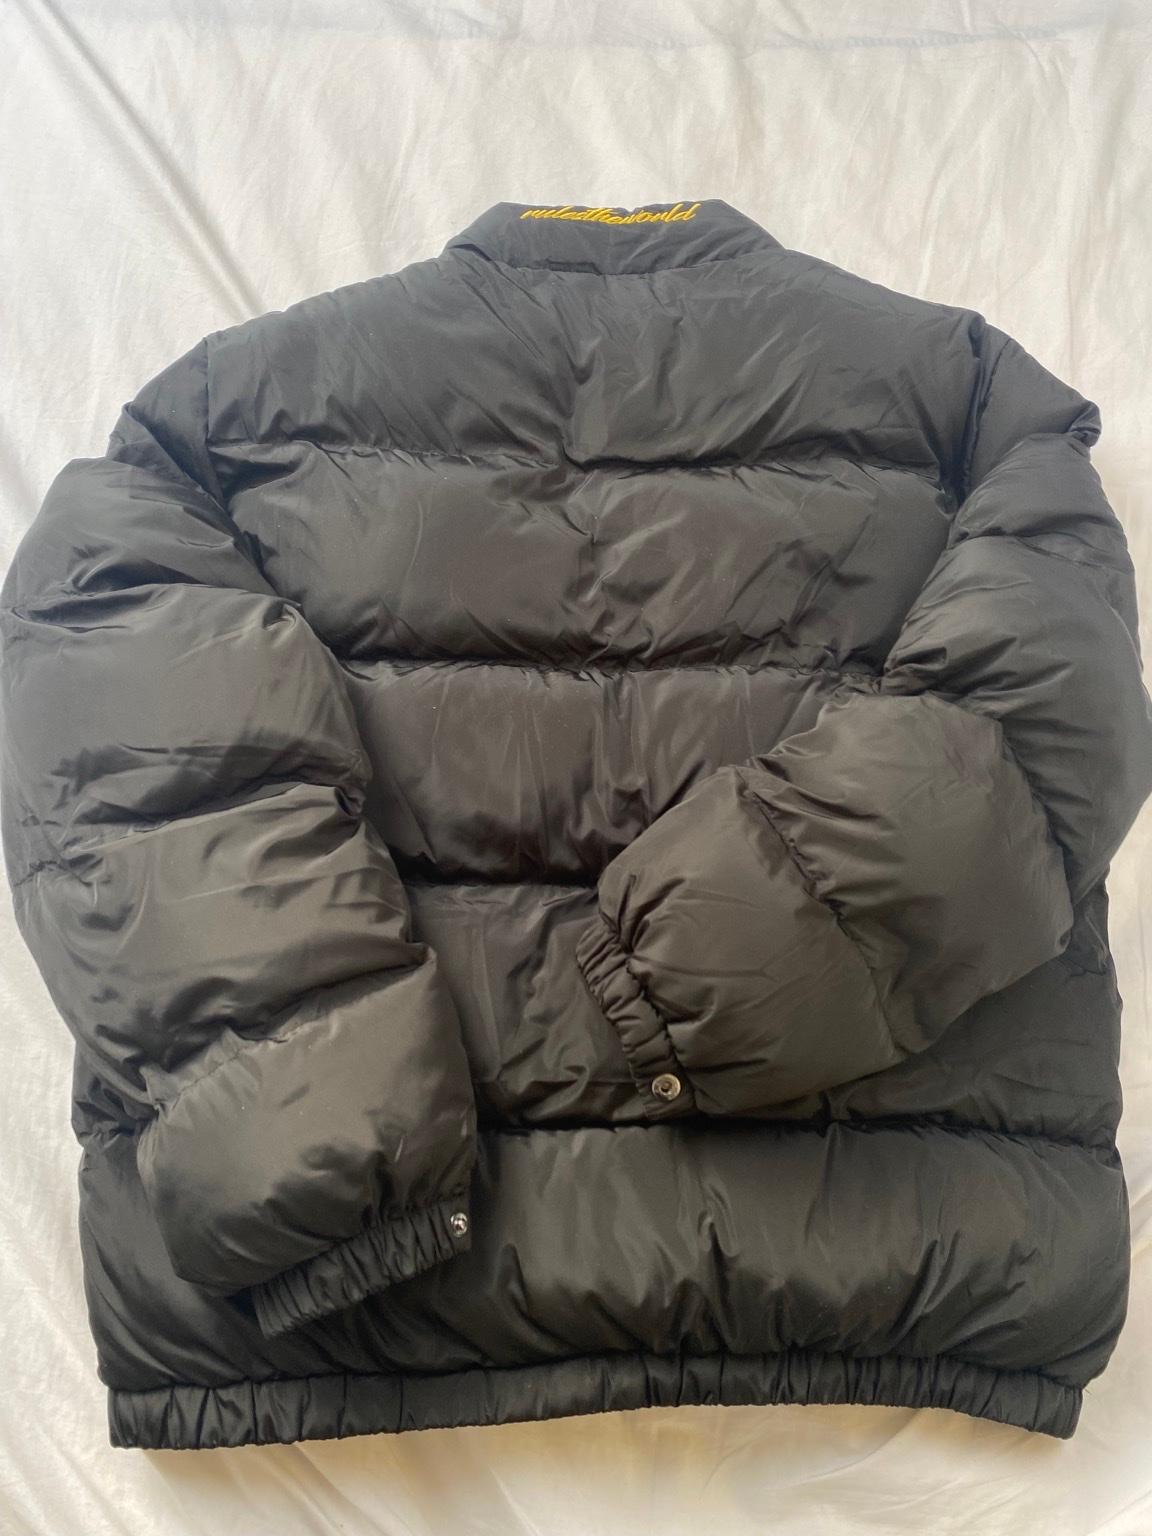 Corteiz CRTZ RTW Bolo Puffer Jacket Black in SW1A Westminster for £330. ...